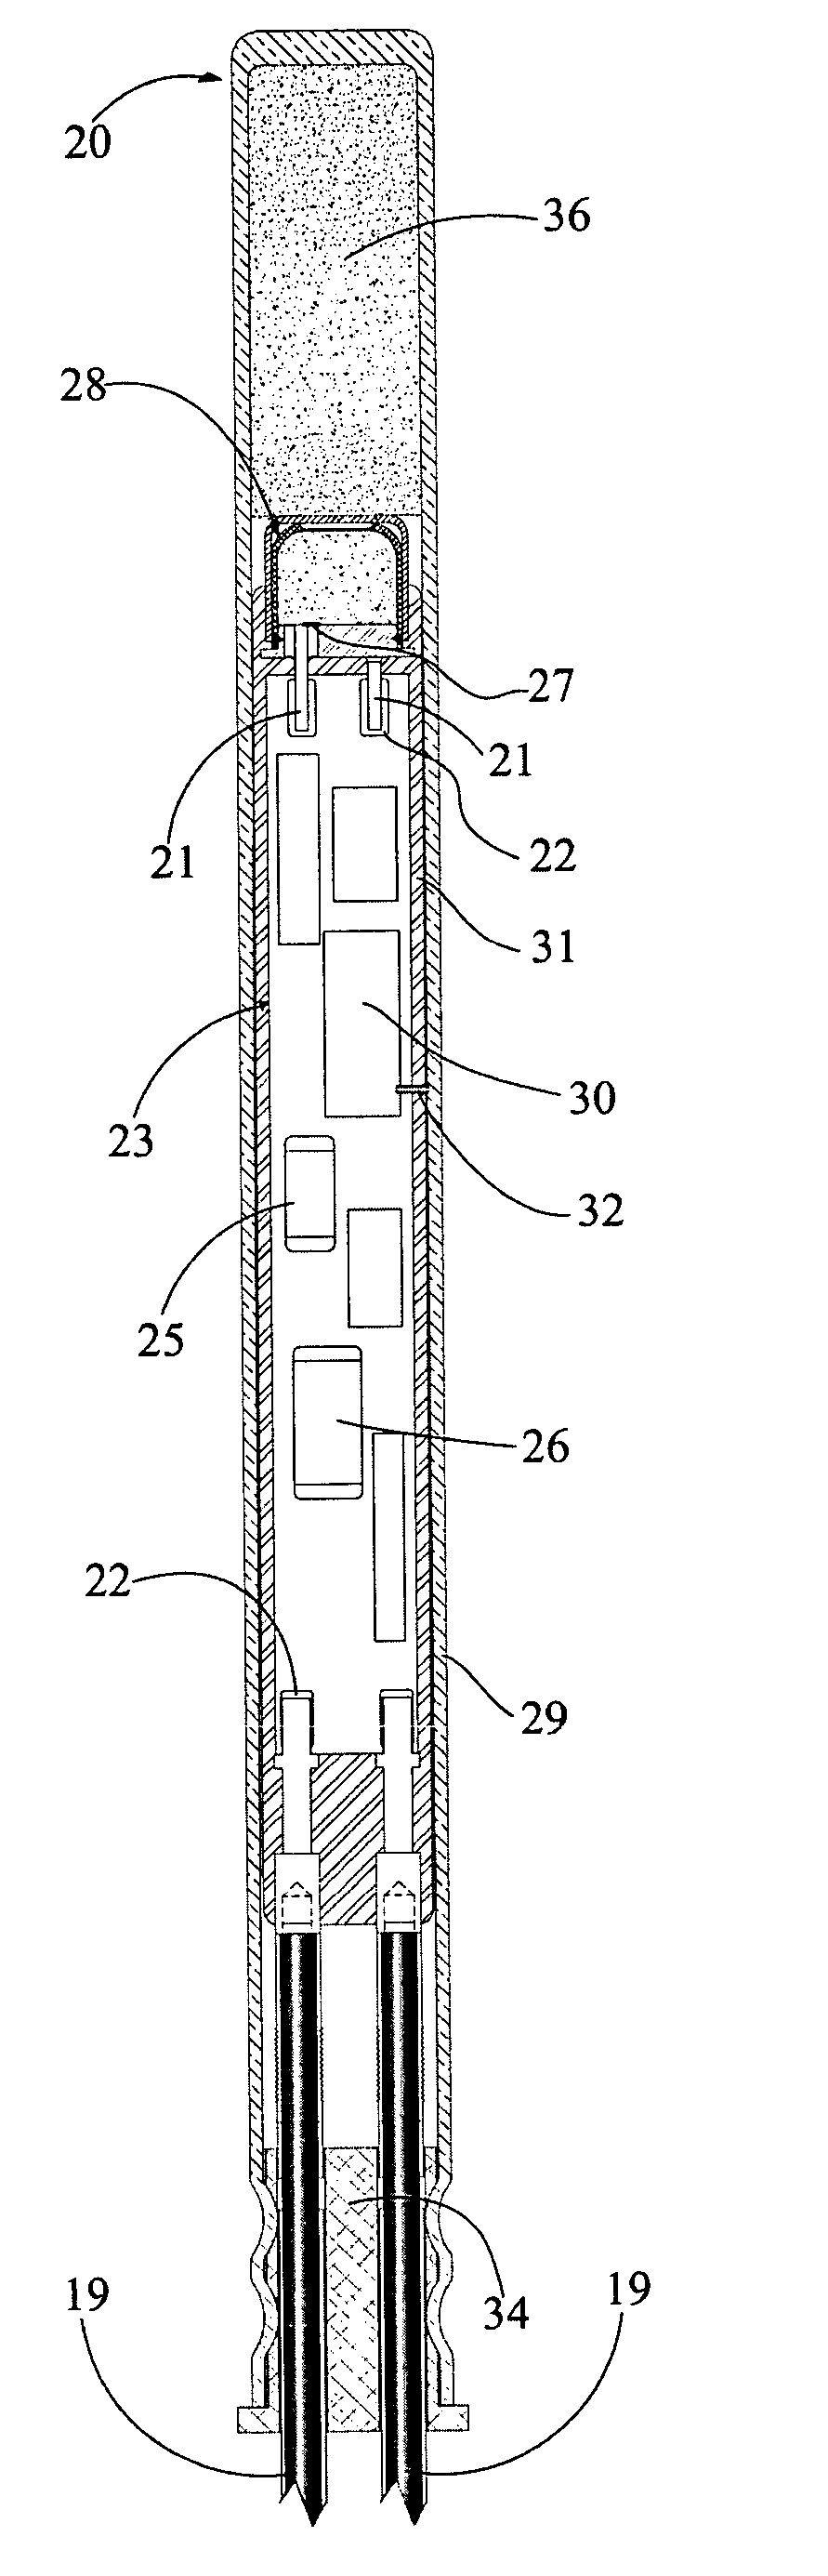 Status flags in a system of electronic pyrotechnic devices such as electronic detonators